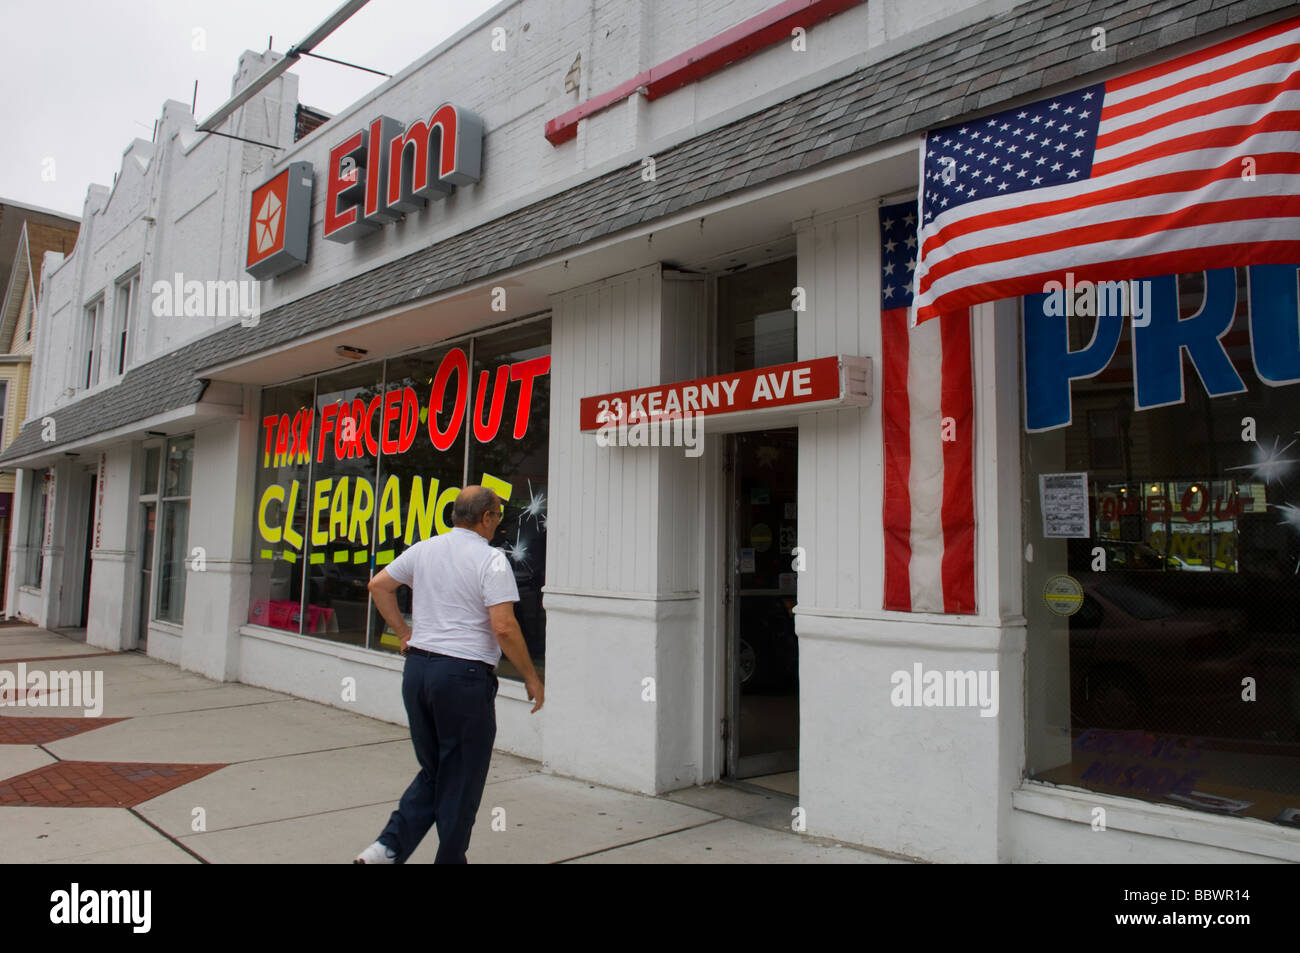 Elm Auto Sales in Kearny NJ ,one of the 789 dealers that Chrysler LLC eliminated Stock Photo